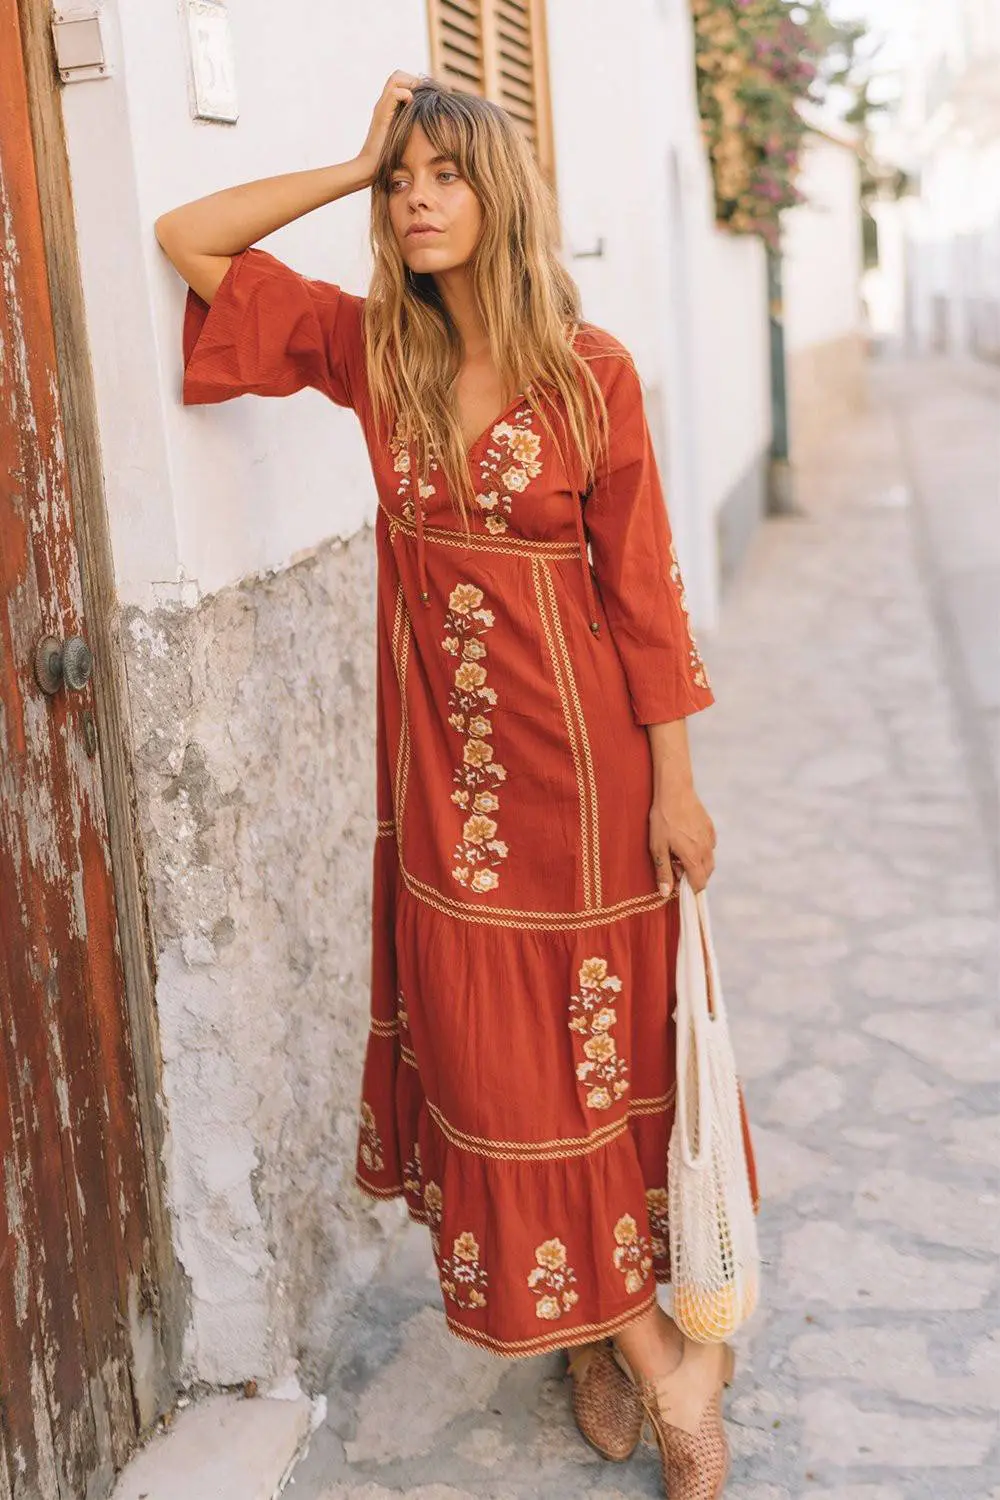 Bohemian Floral Embroidered V-Neck Long Sleeve Maxi Dress in Dresses